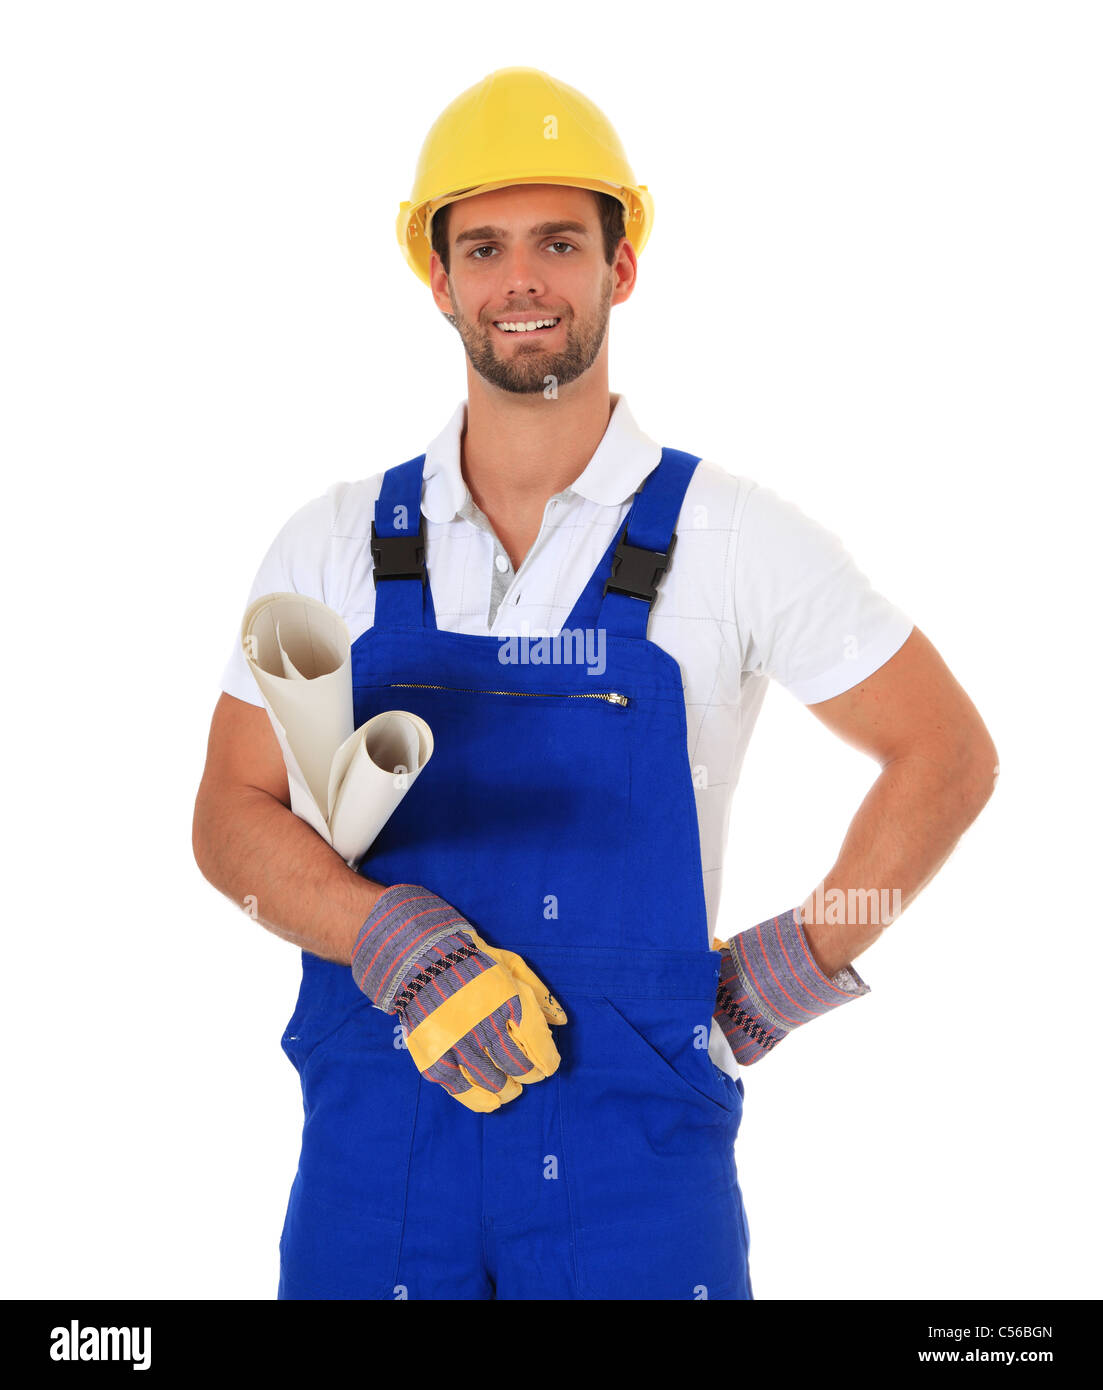 Confident manual worker. All on white background Stock Photo